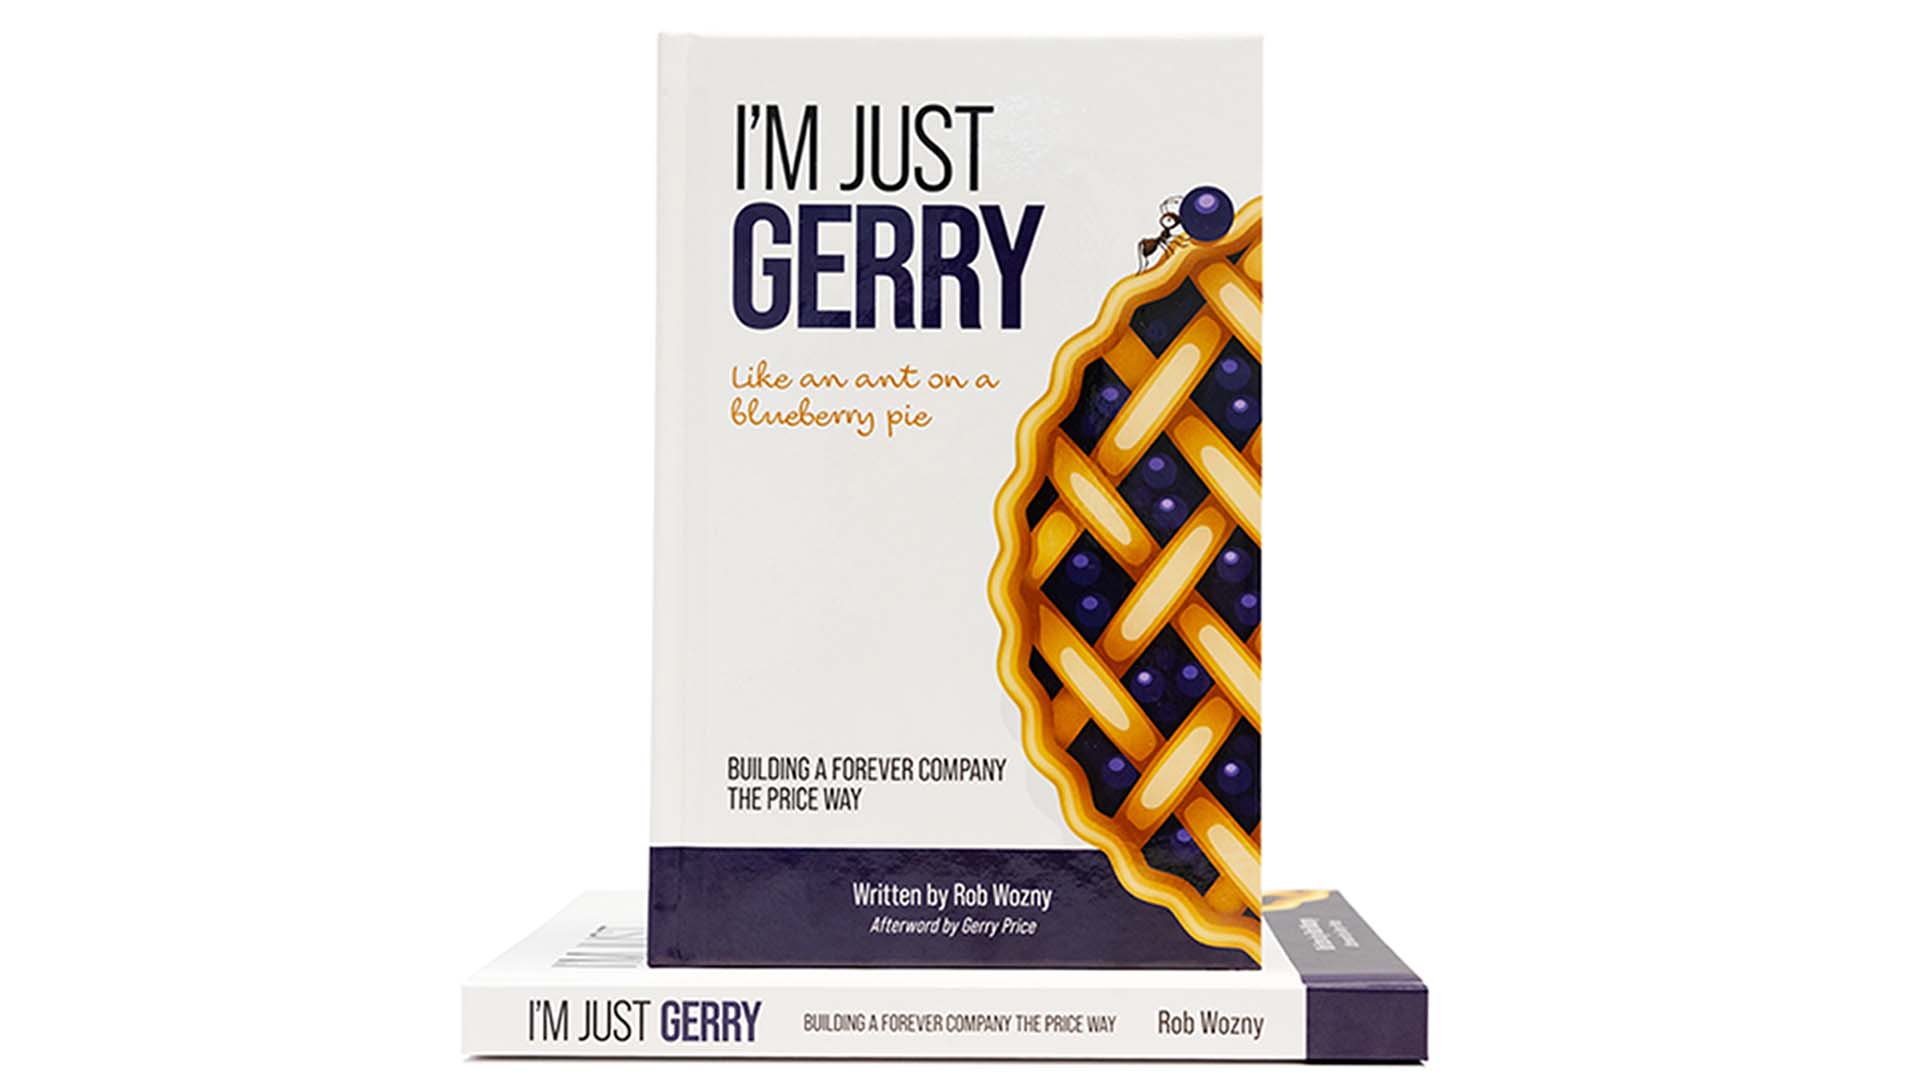 I'm Just Gerry - Like and Ant on a Blueberry Pie book cover and held in hand.